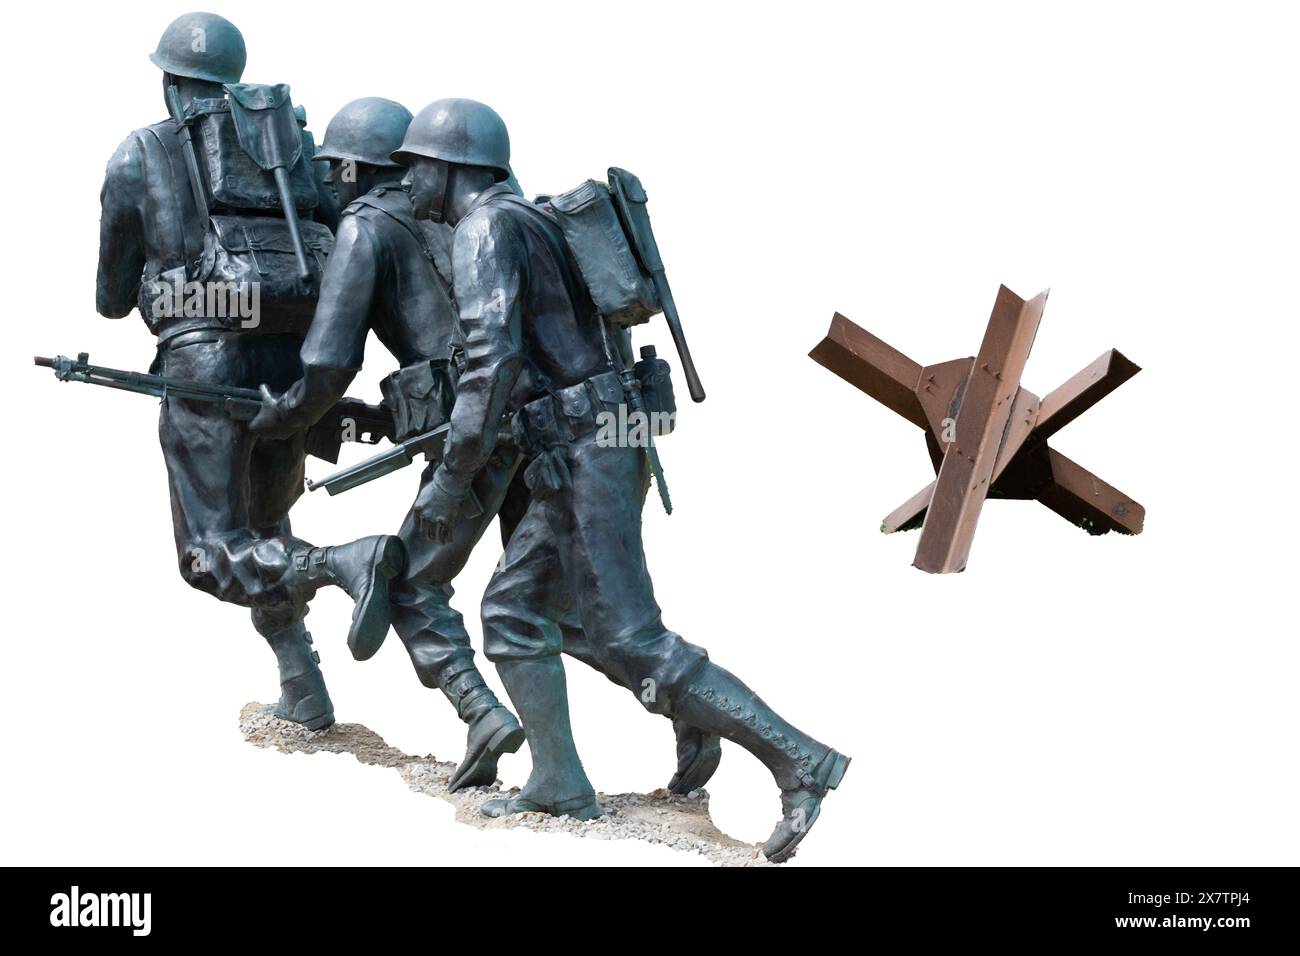 Normandy France D-Day memorial hedgehog soldiers sculptures clipping path isolated Stock Photo